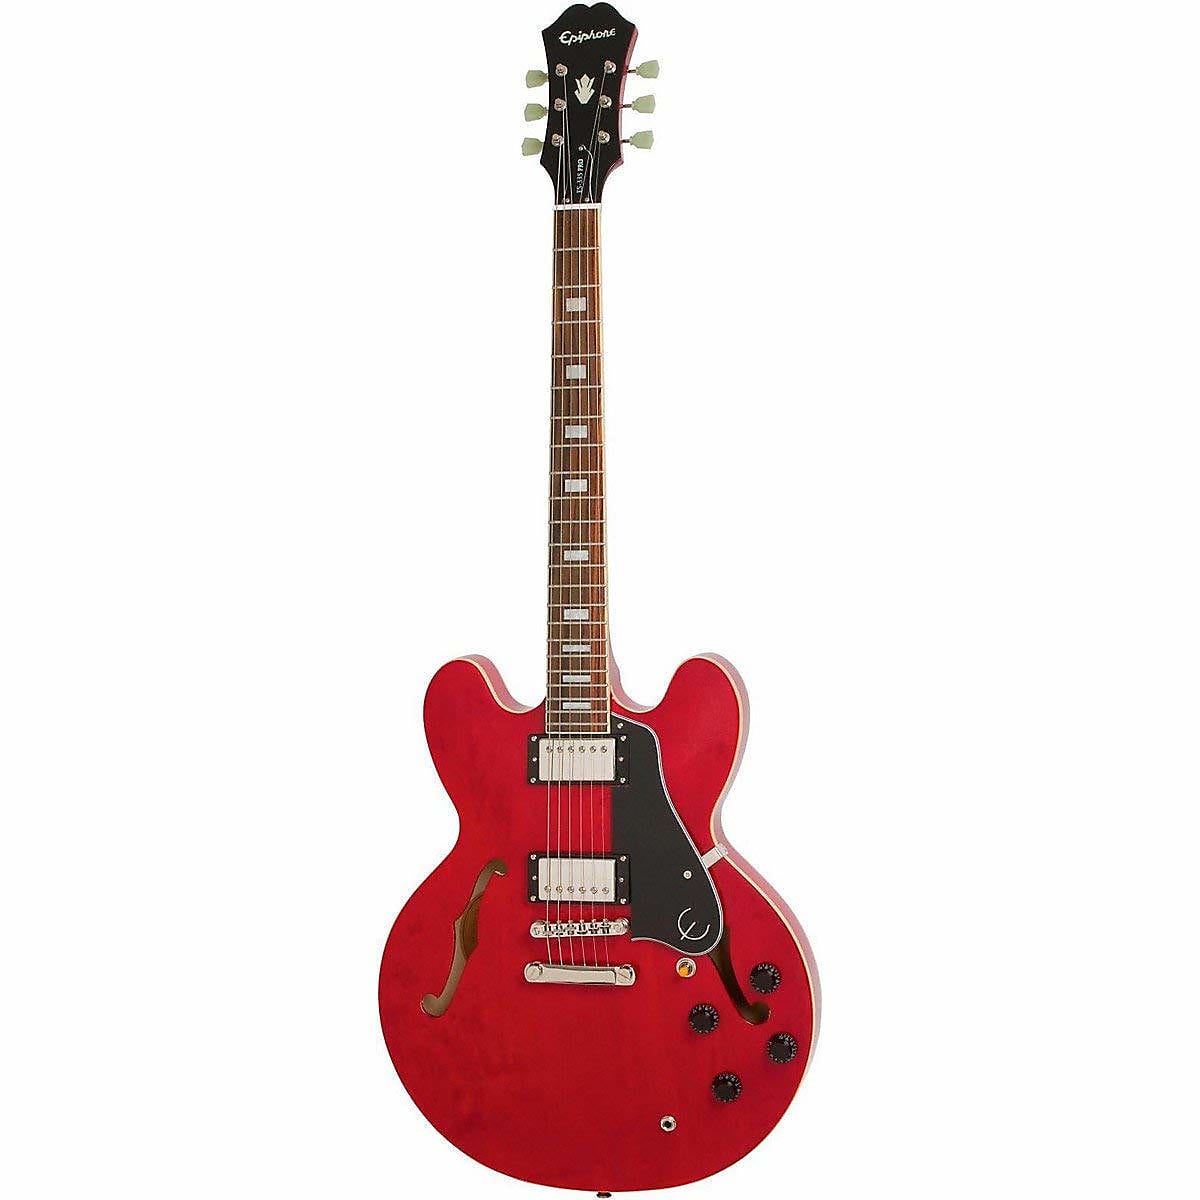 Epiphone ★Epiphone by Gibson★Custom Shop Limited Edition ES-335 PRO Cherry セミアコモデル 2018年製 美品 エピフォン★